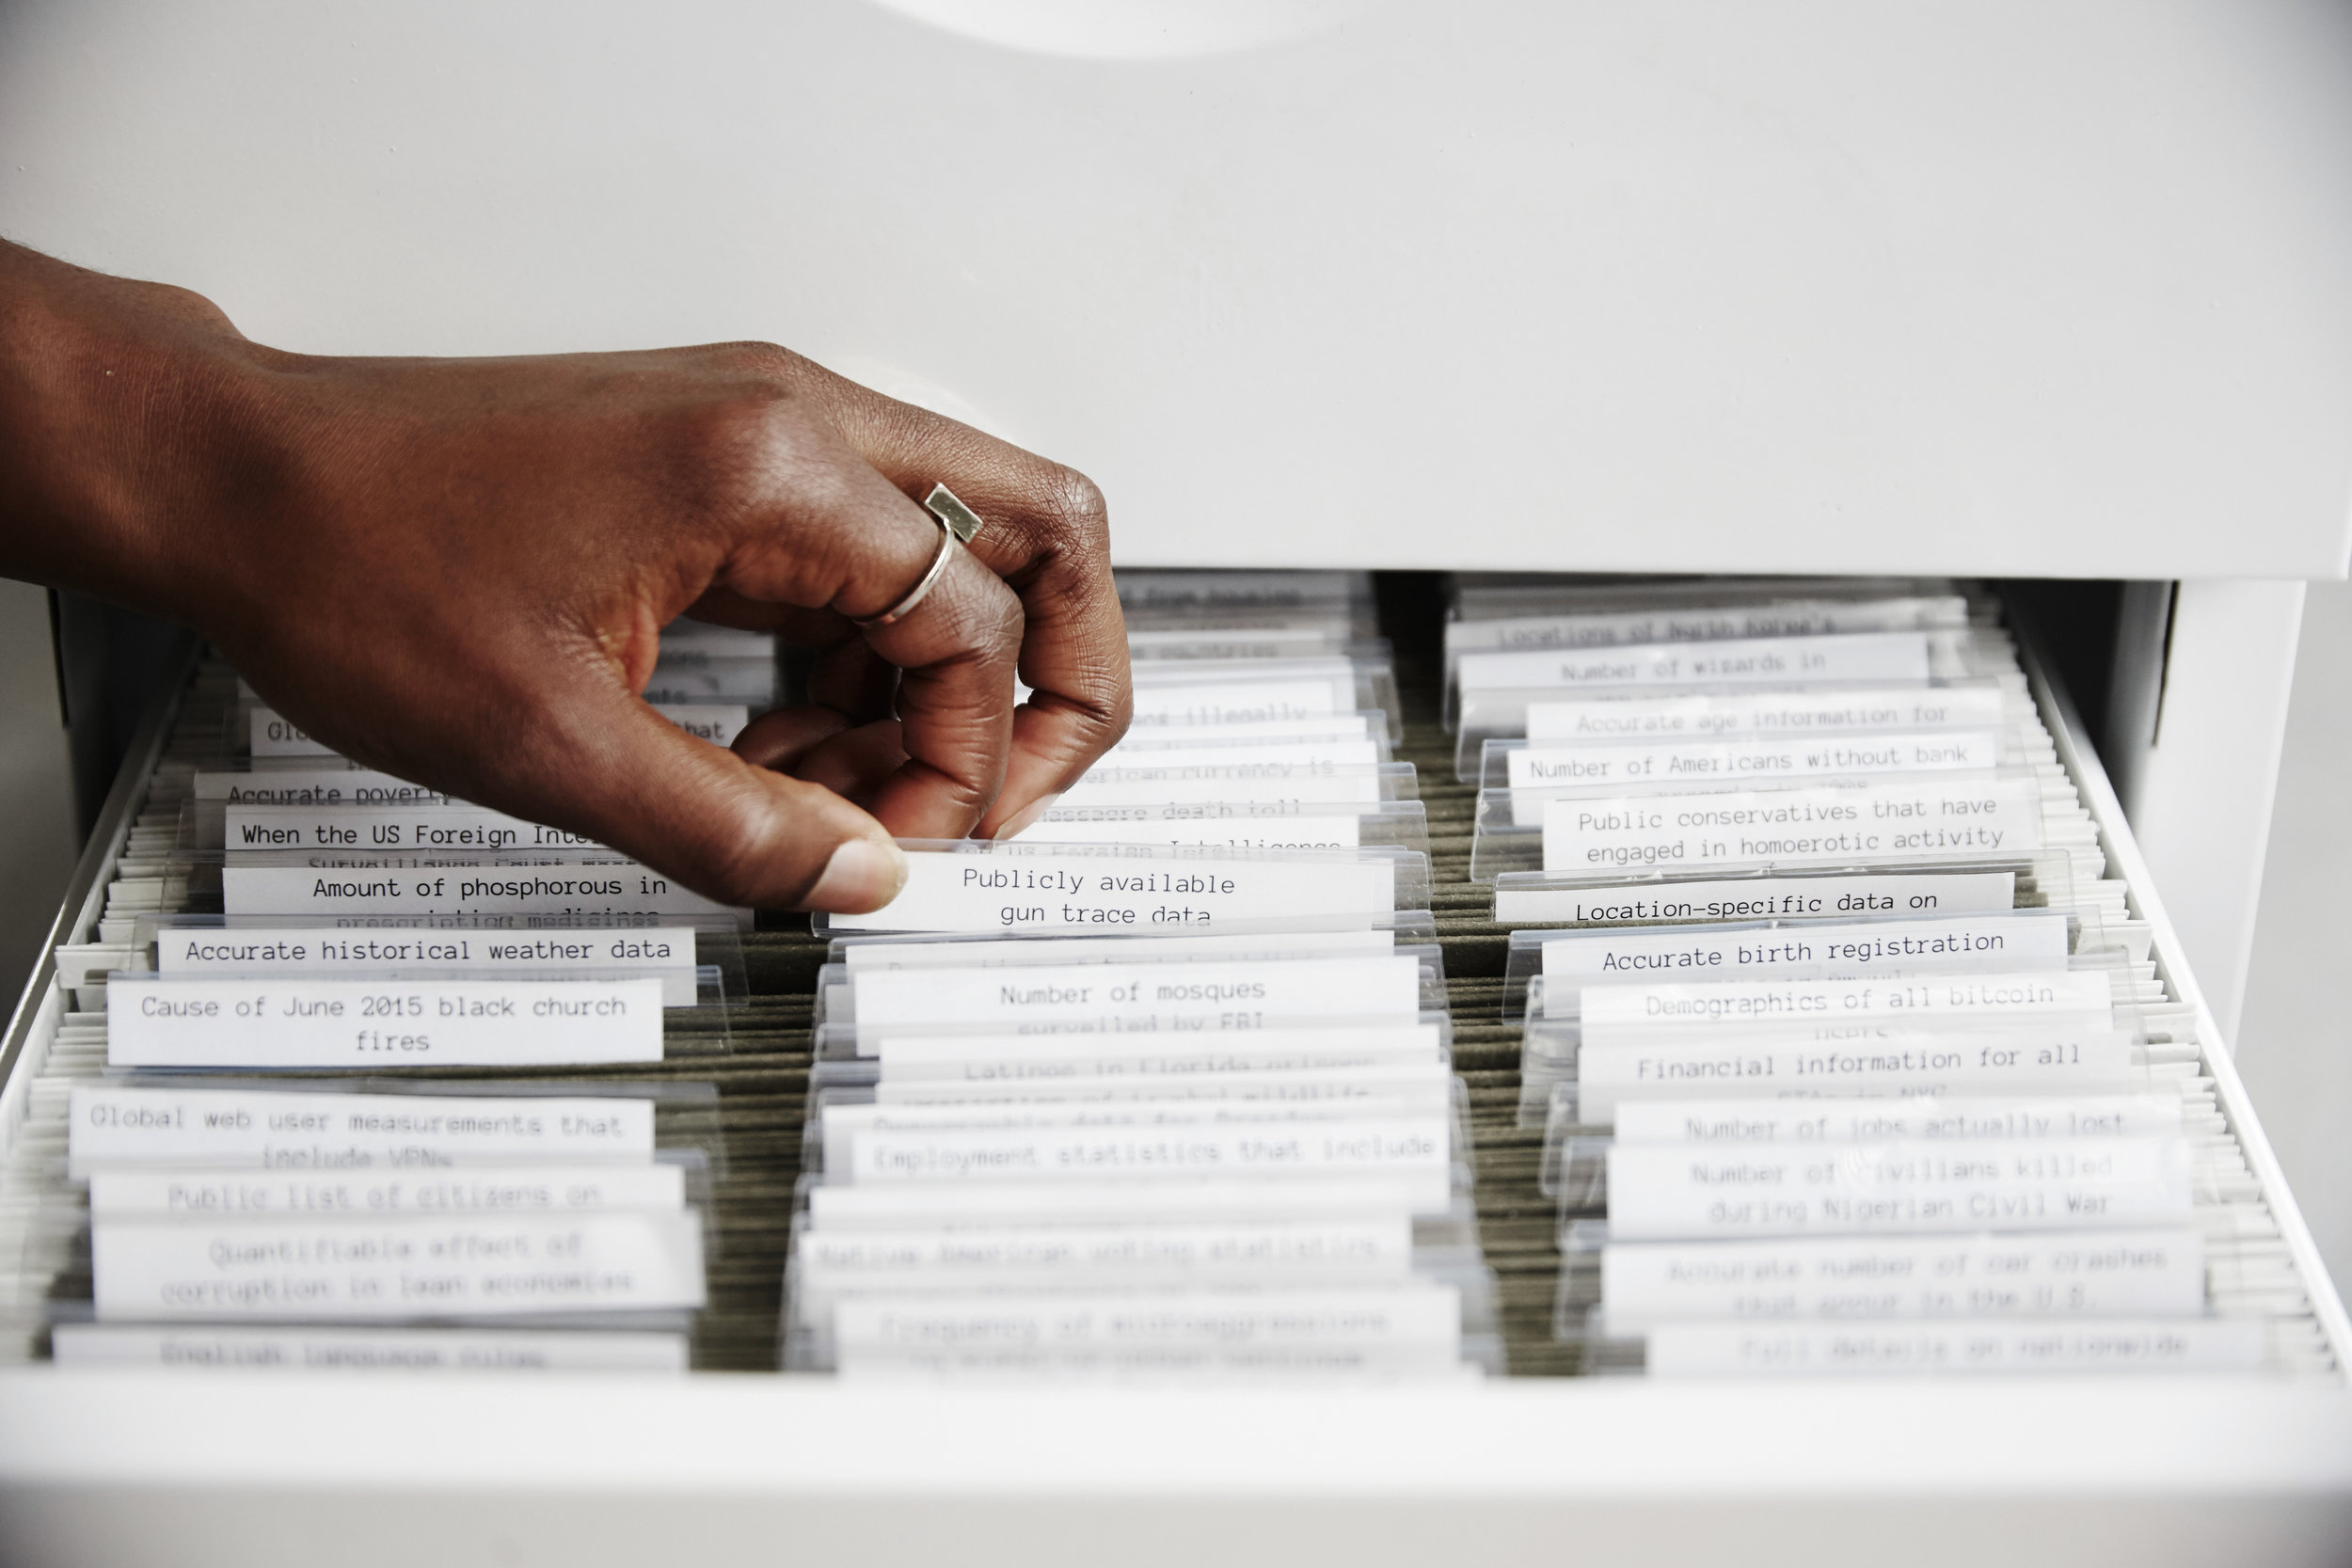 Mimi Onuoha's installation "Library of Missing Datasets".